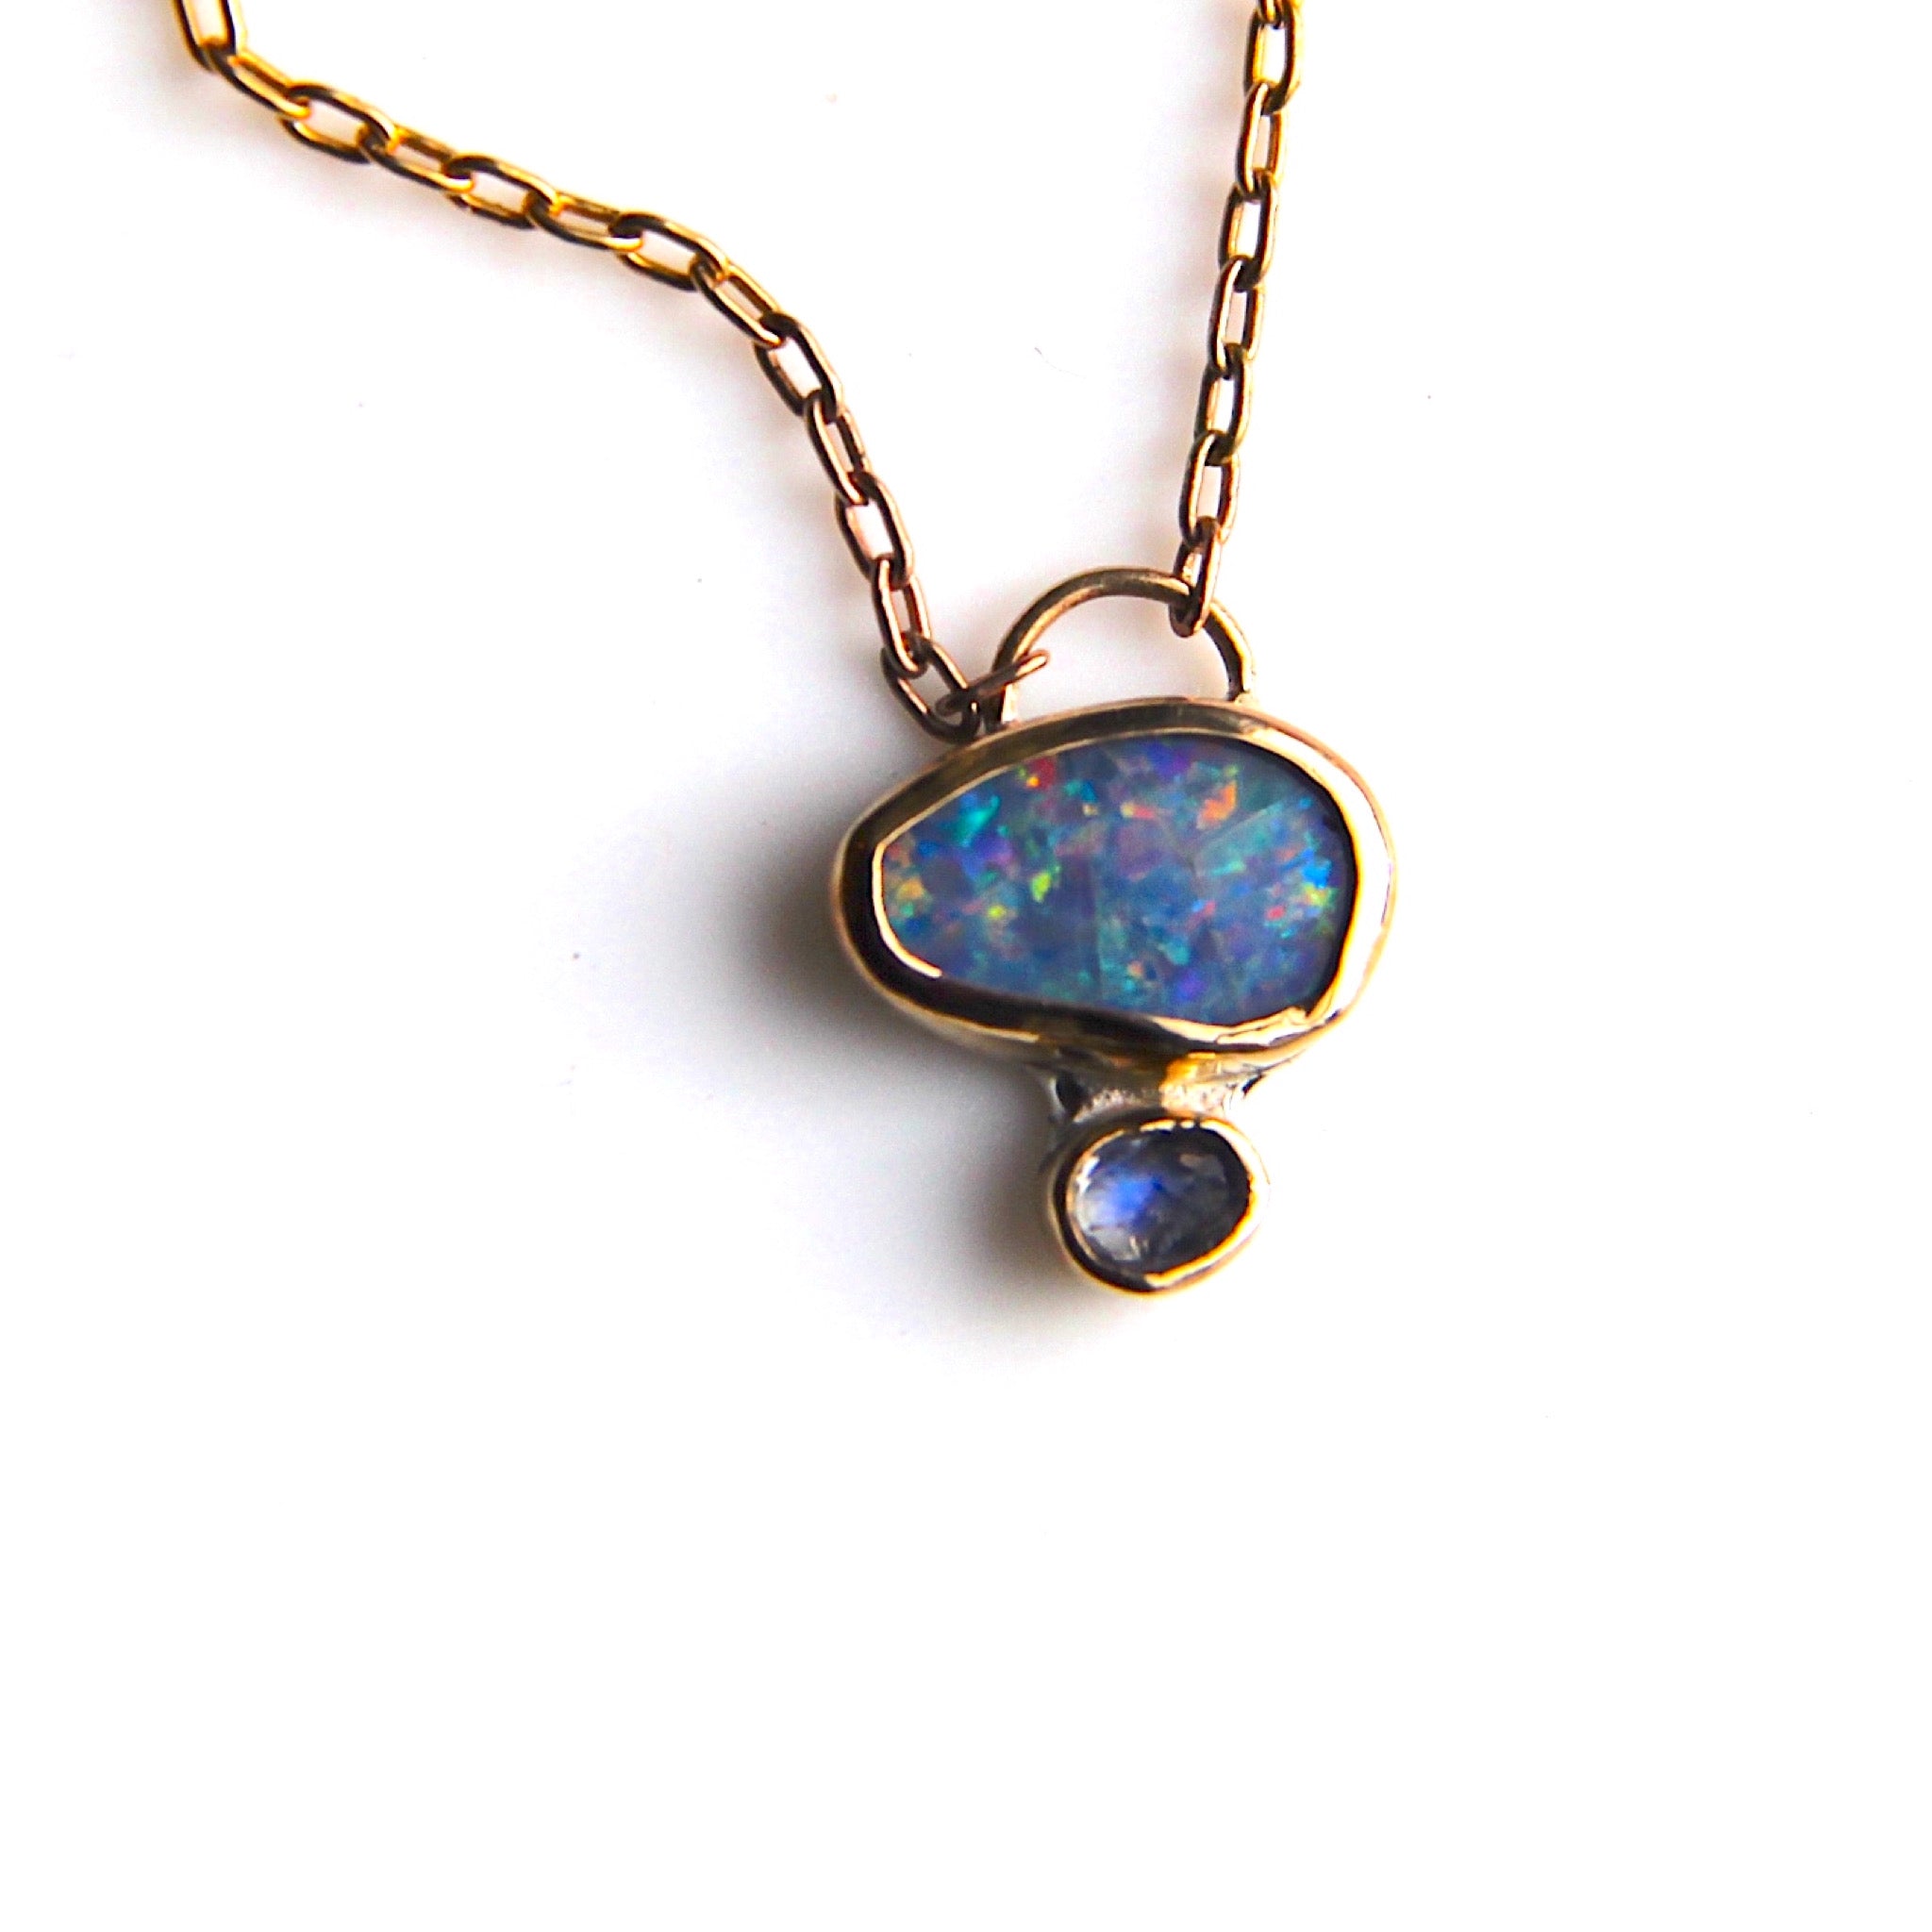 Opal & Moonstone necklace